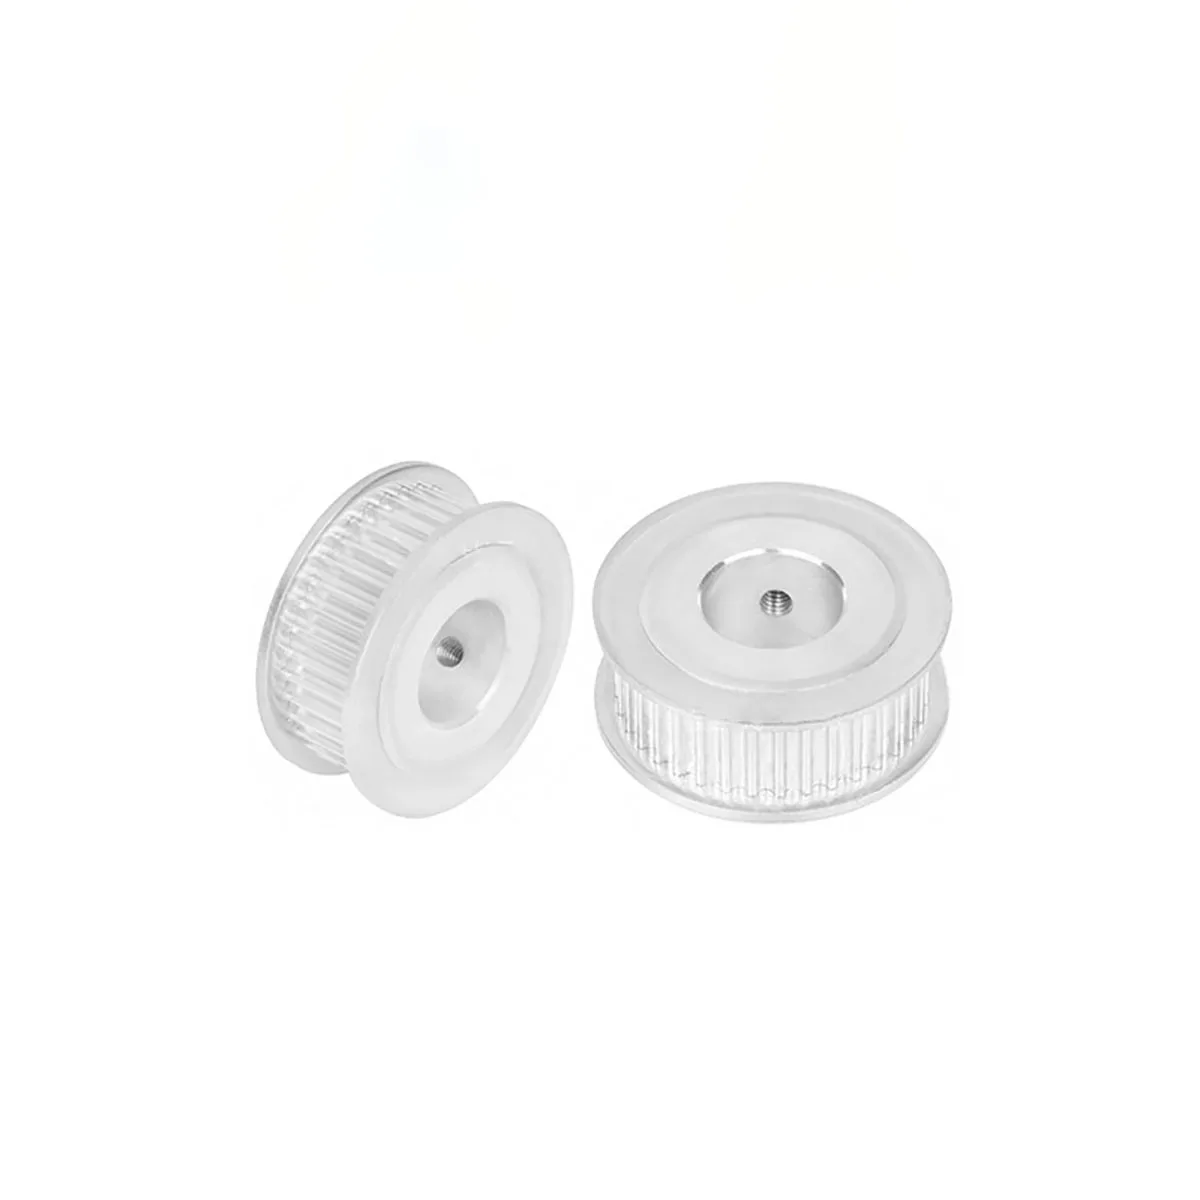 

1Pcs S3M 26 Tooth Timing Pulley Bore 5mm - 15mm Alumium Synchronous Pulley Wheel For Width 6/10/15/20mm S3M Timing Belt